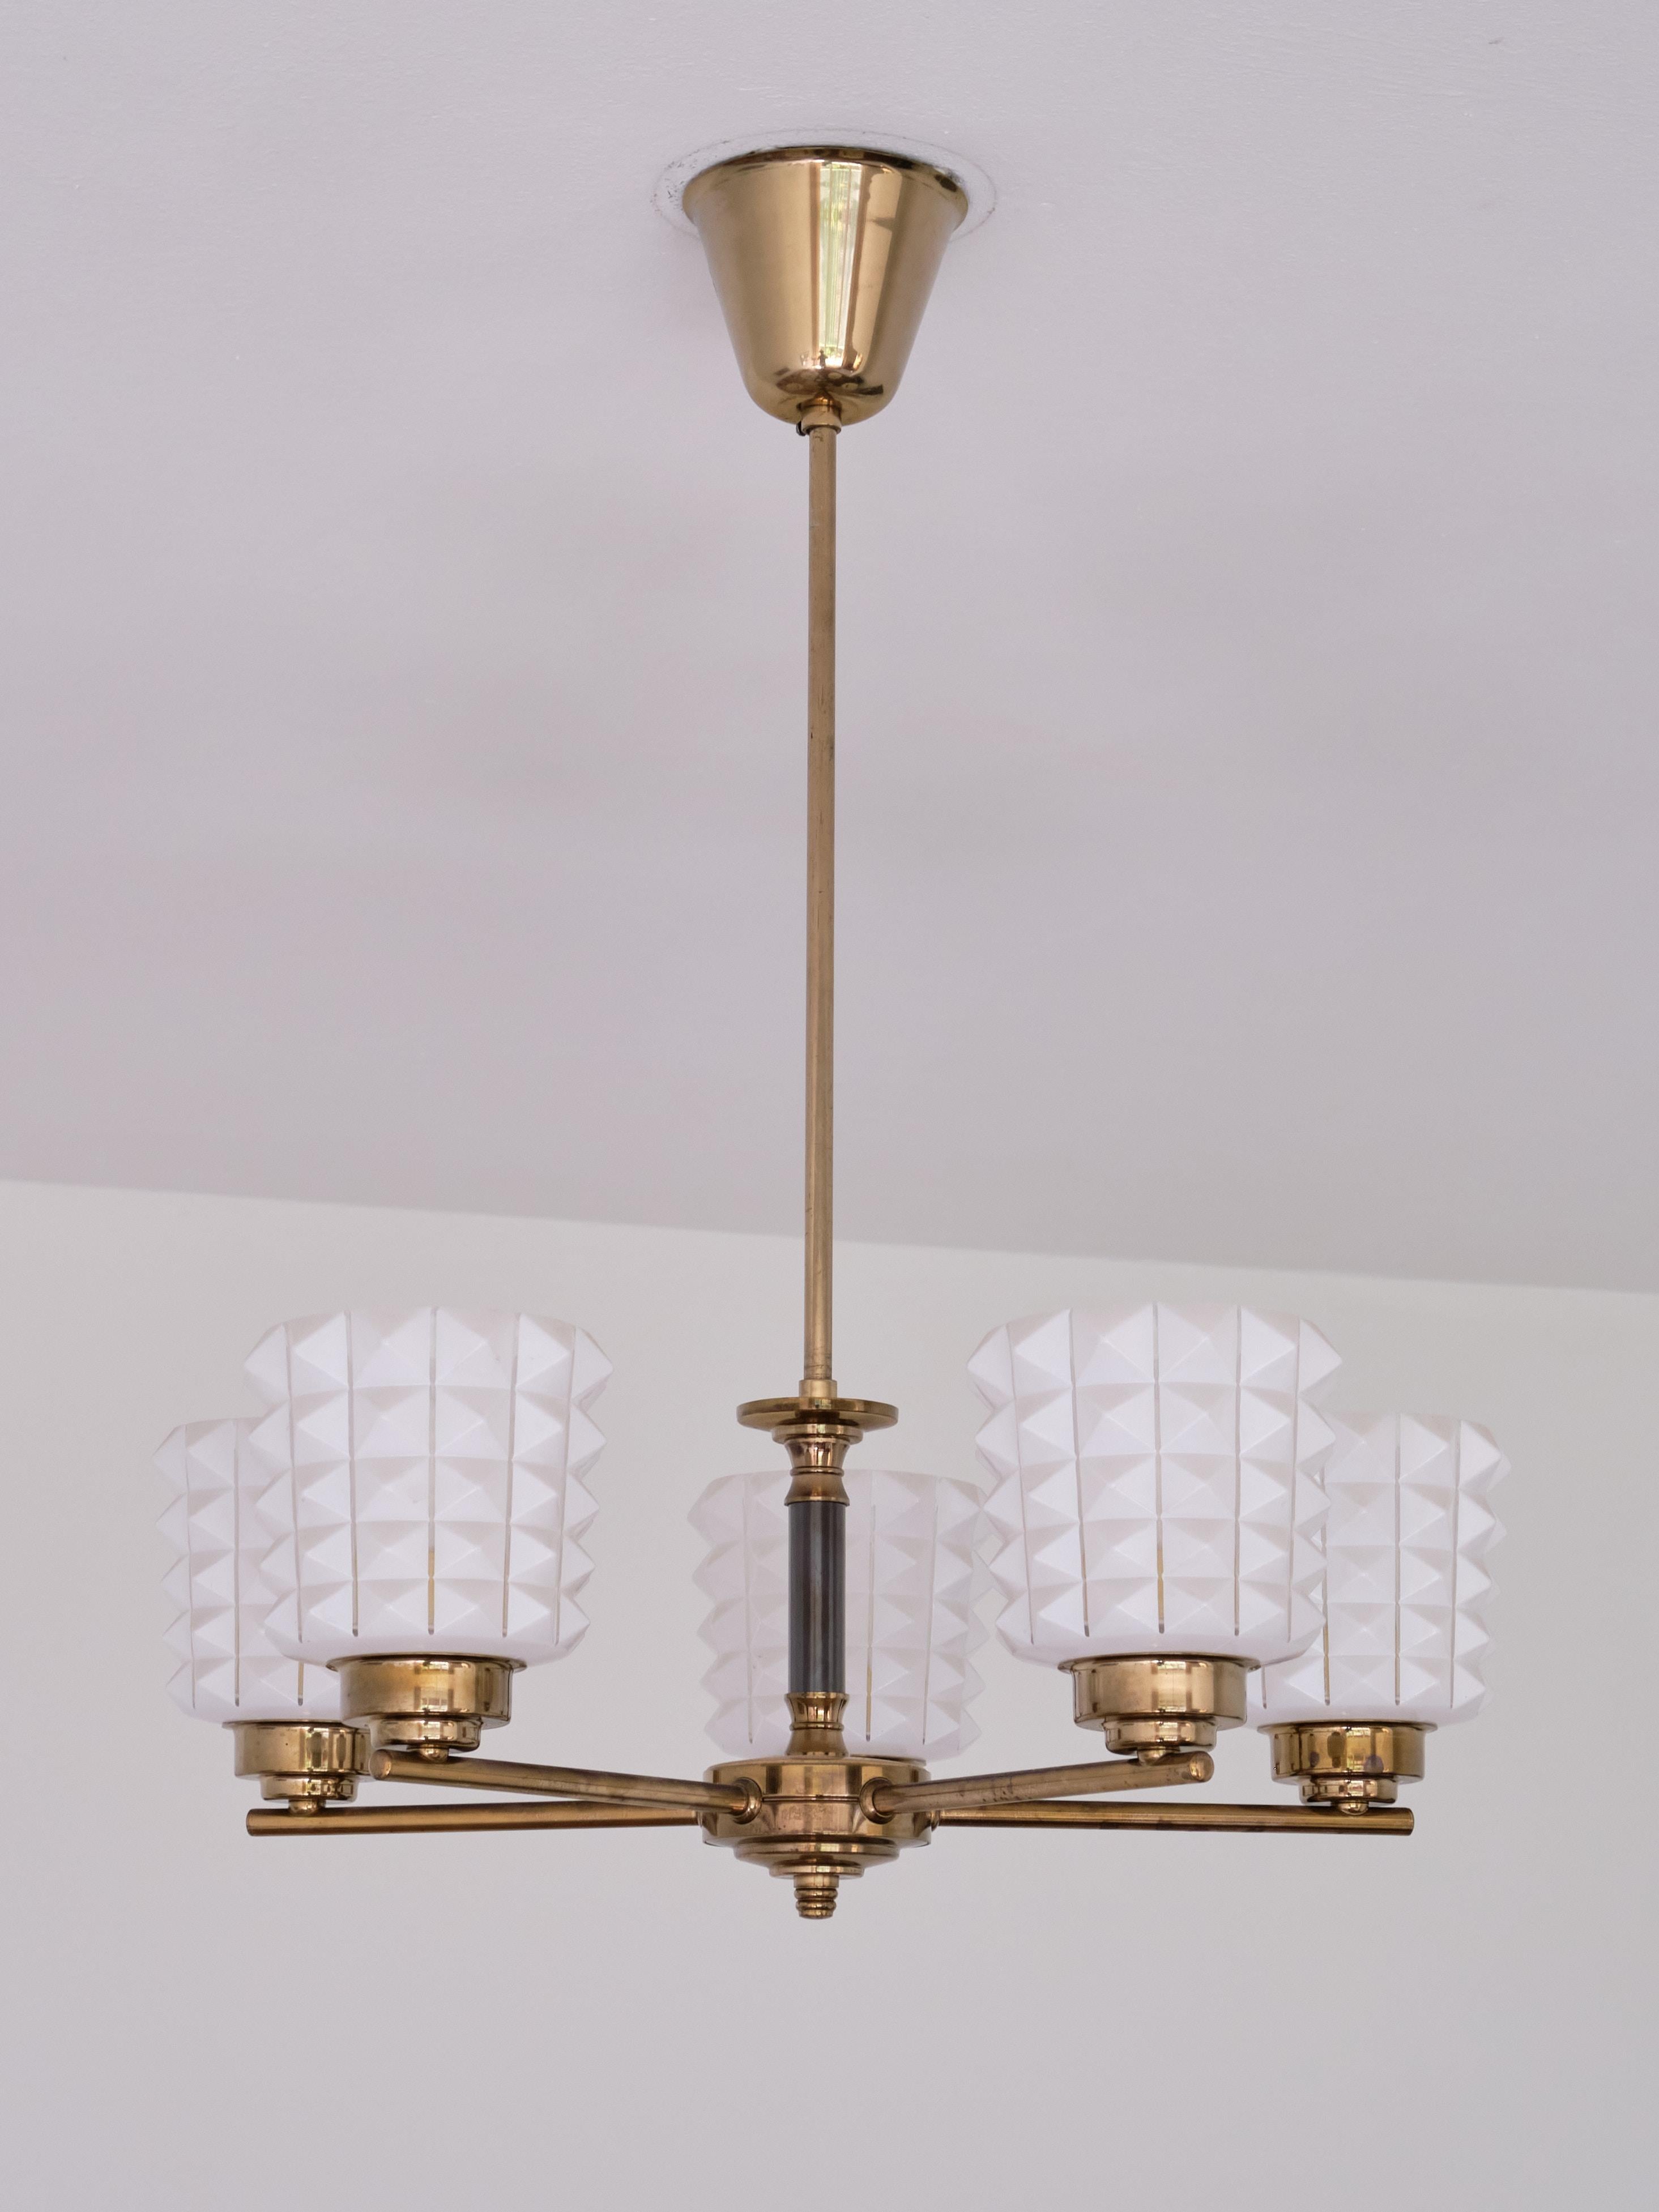 Mid-20th Century Swedish Modern Five Arm Chandelier in Brass and Studded Opal Glass, 1950s For Sale